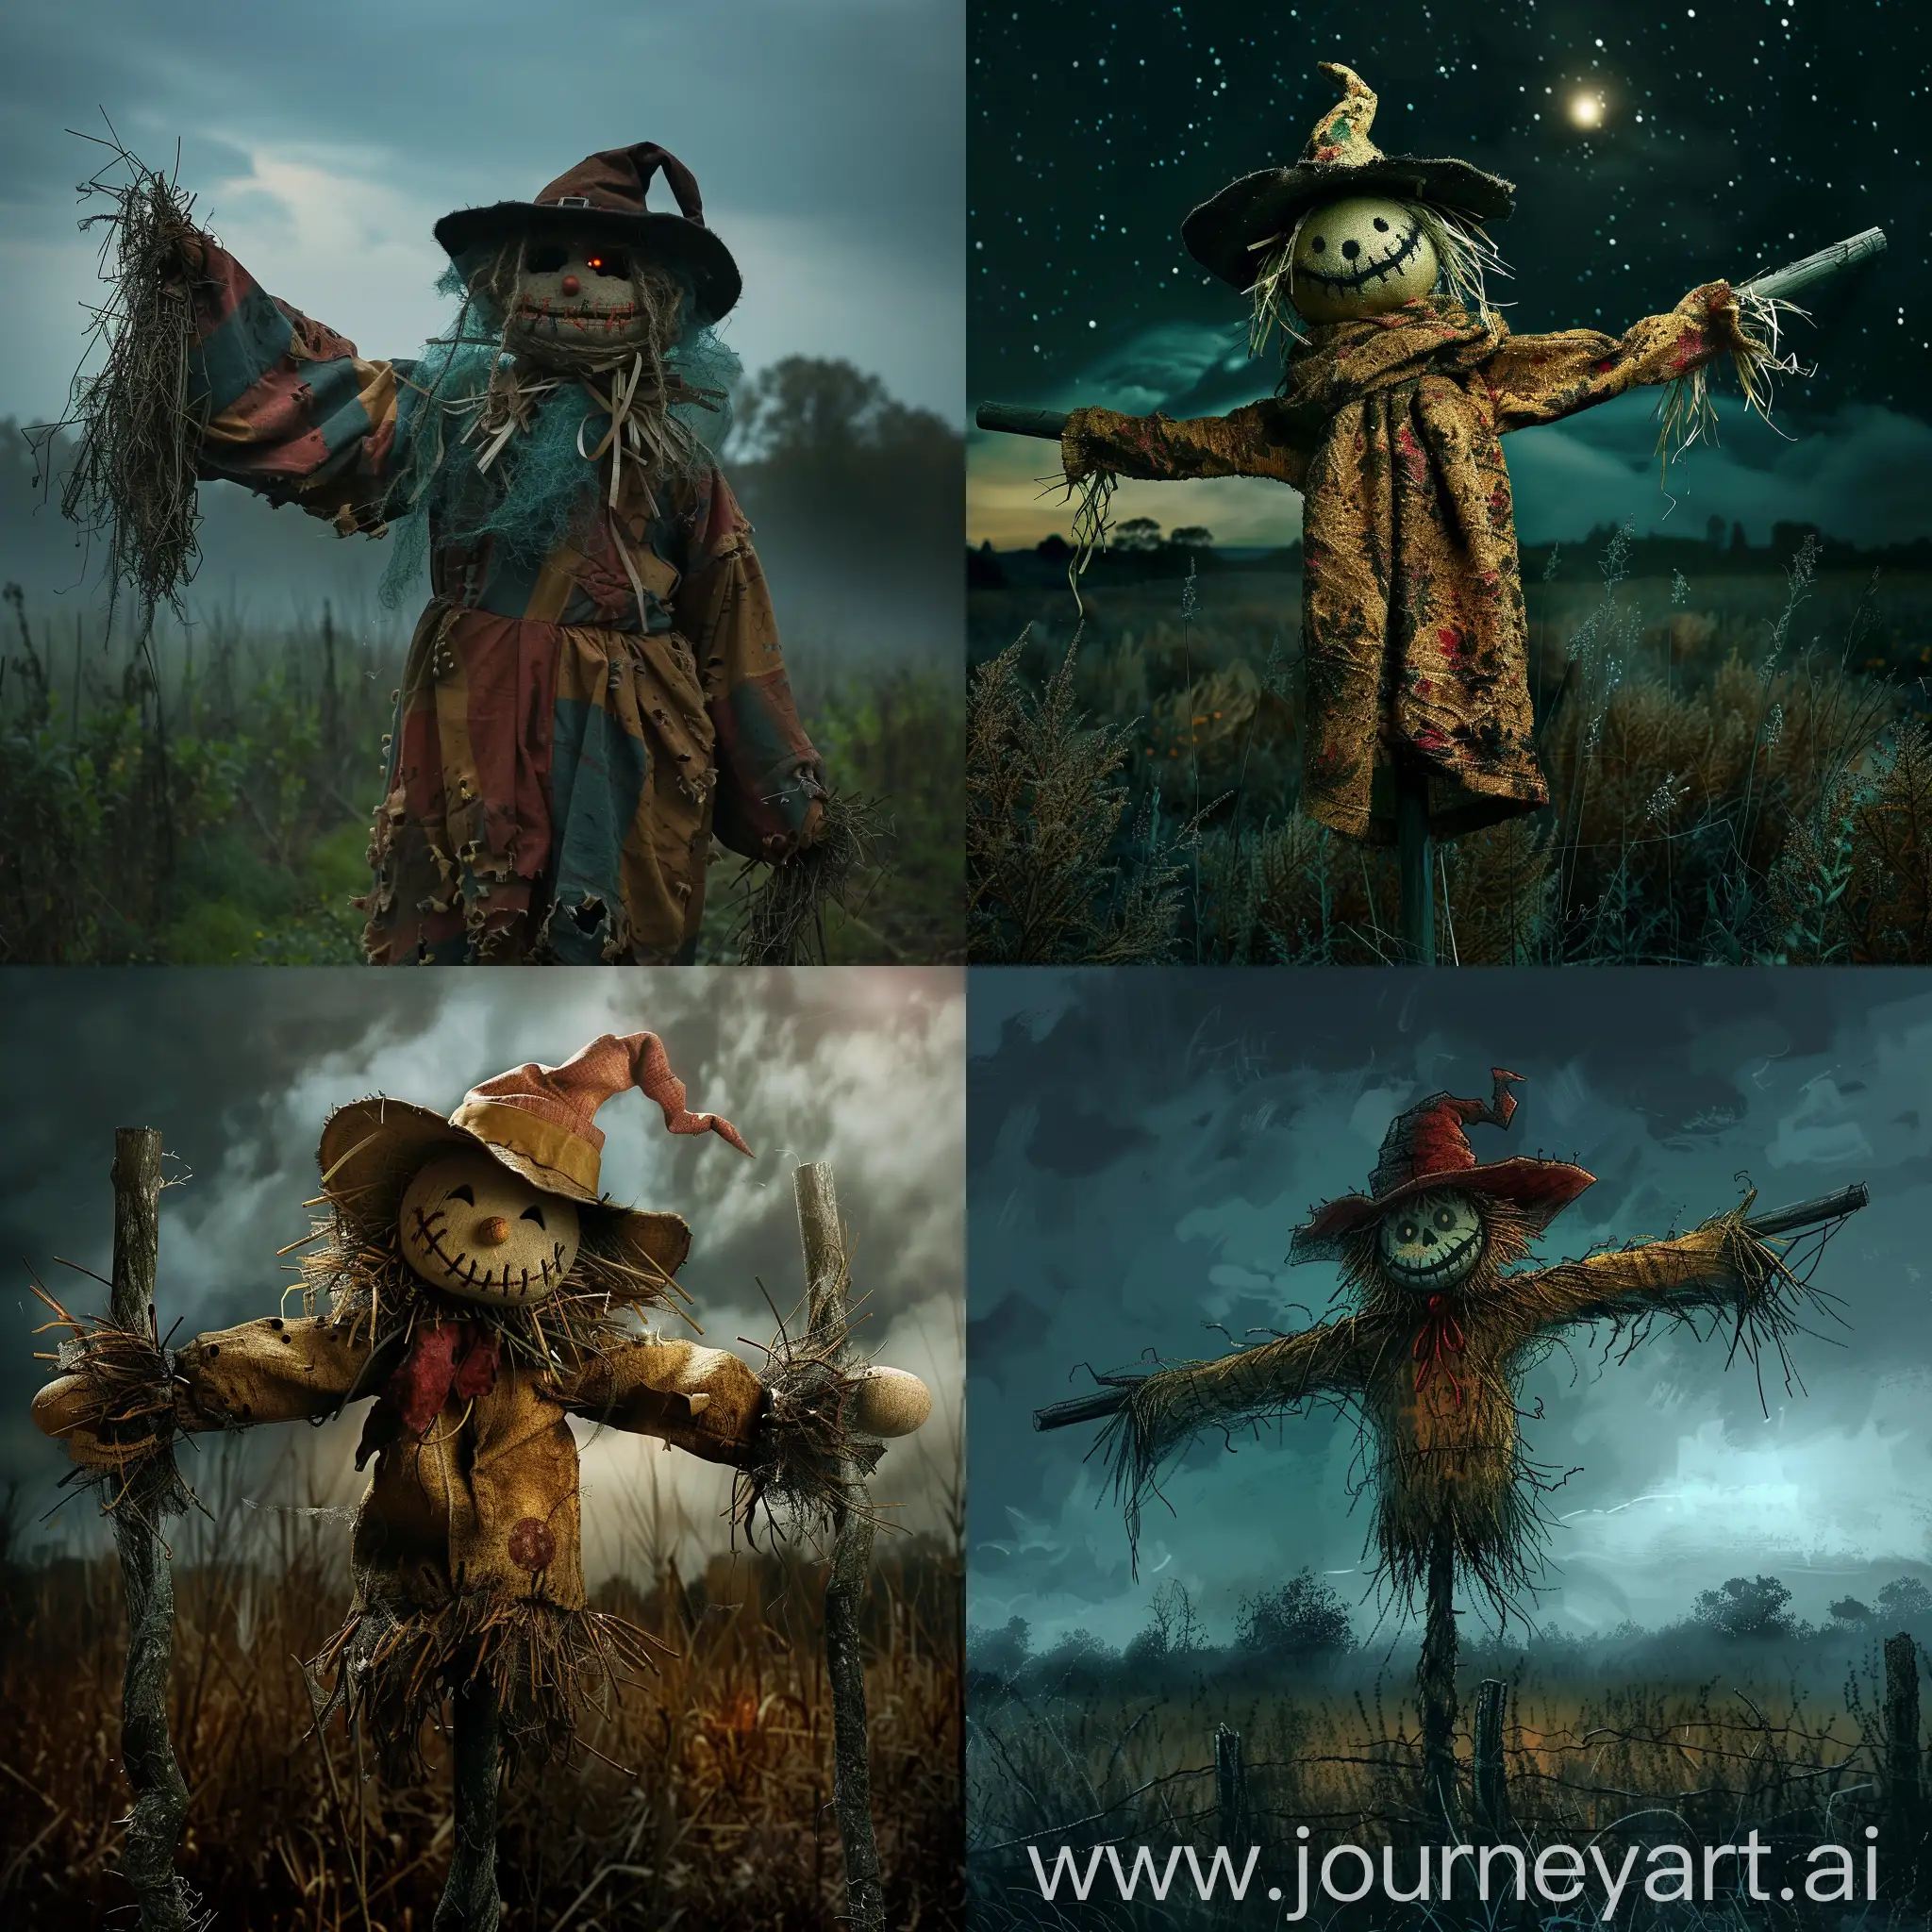 A quirky, eccentric, friendly, and living scarecrow in a dark spooky field